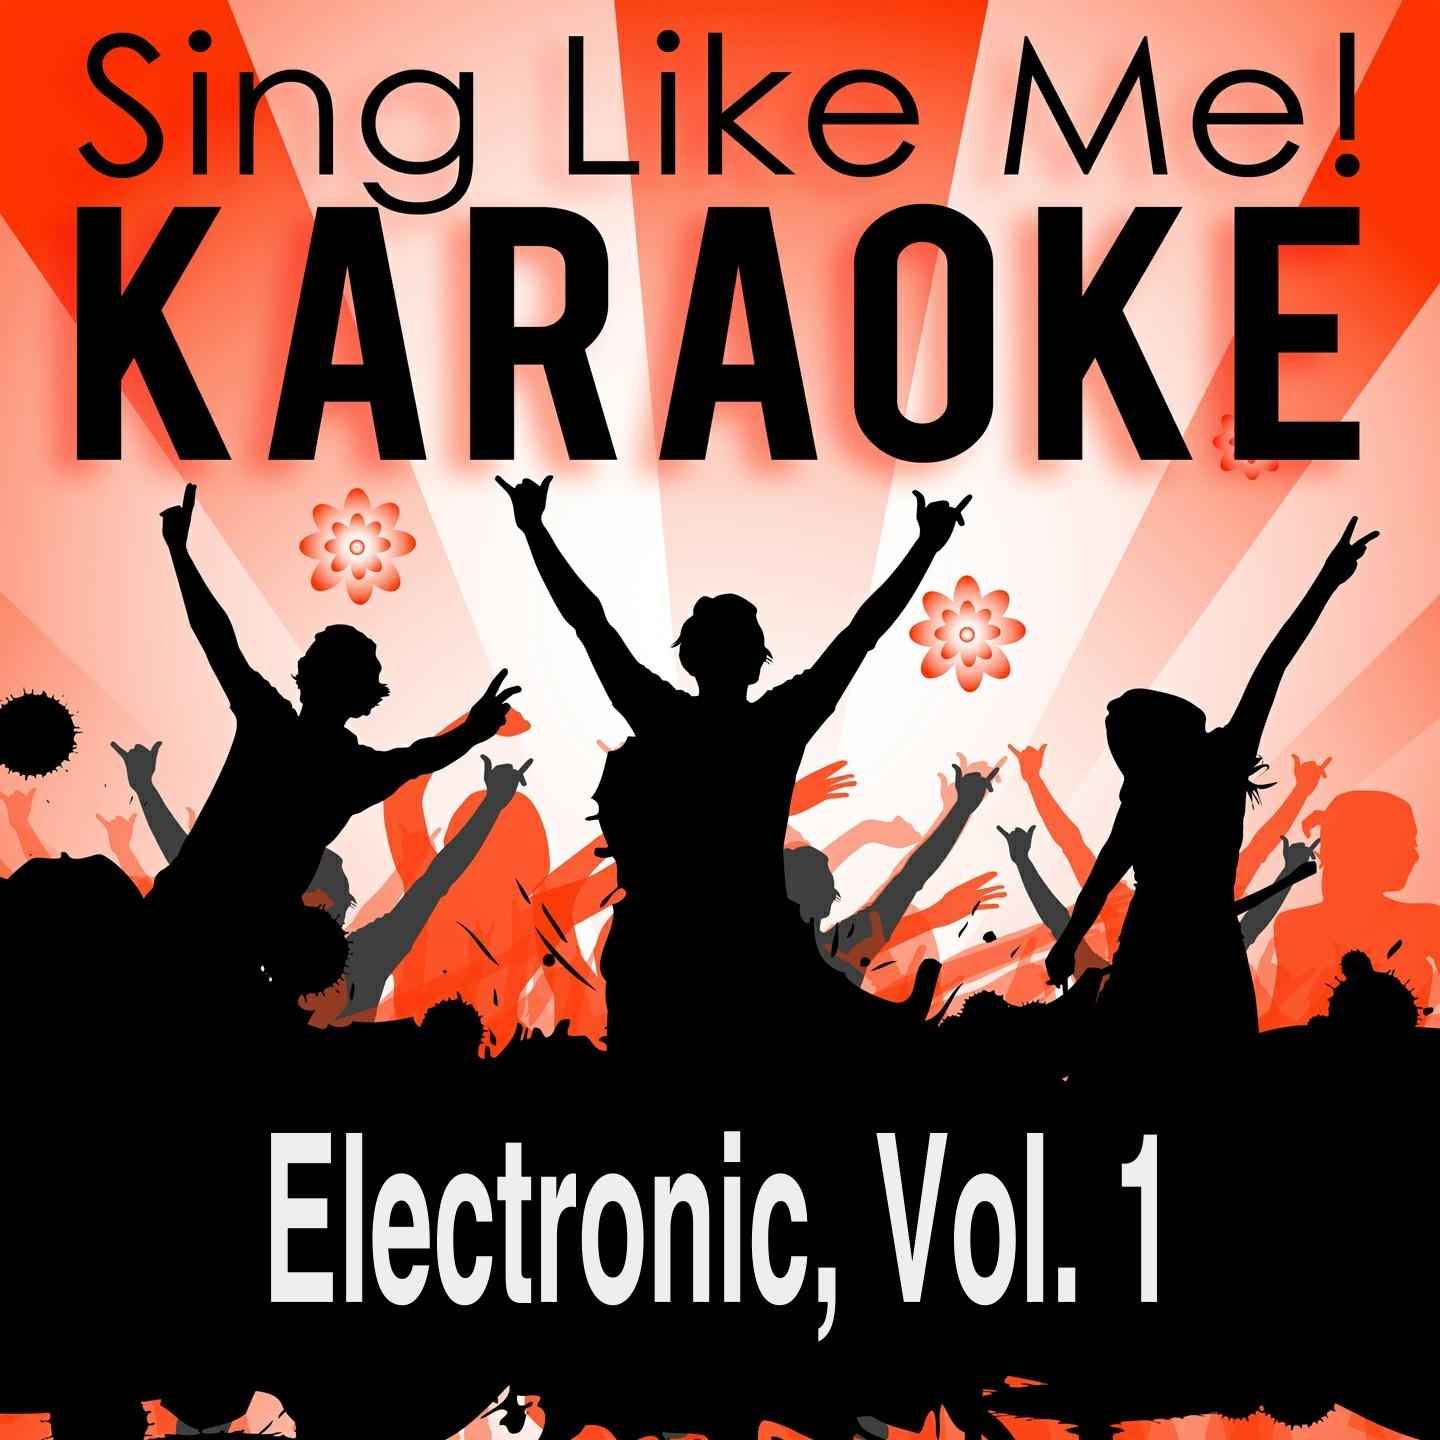 In the Dark (Karaoke Version With Guide Melody) (Originally Performed By Dev)